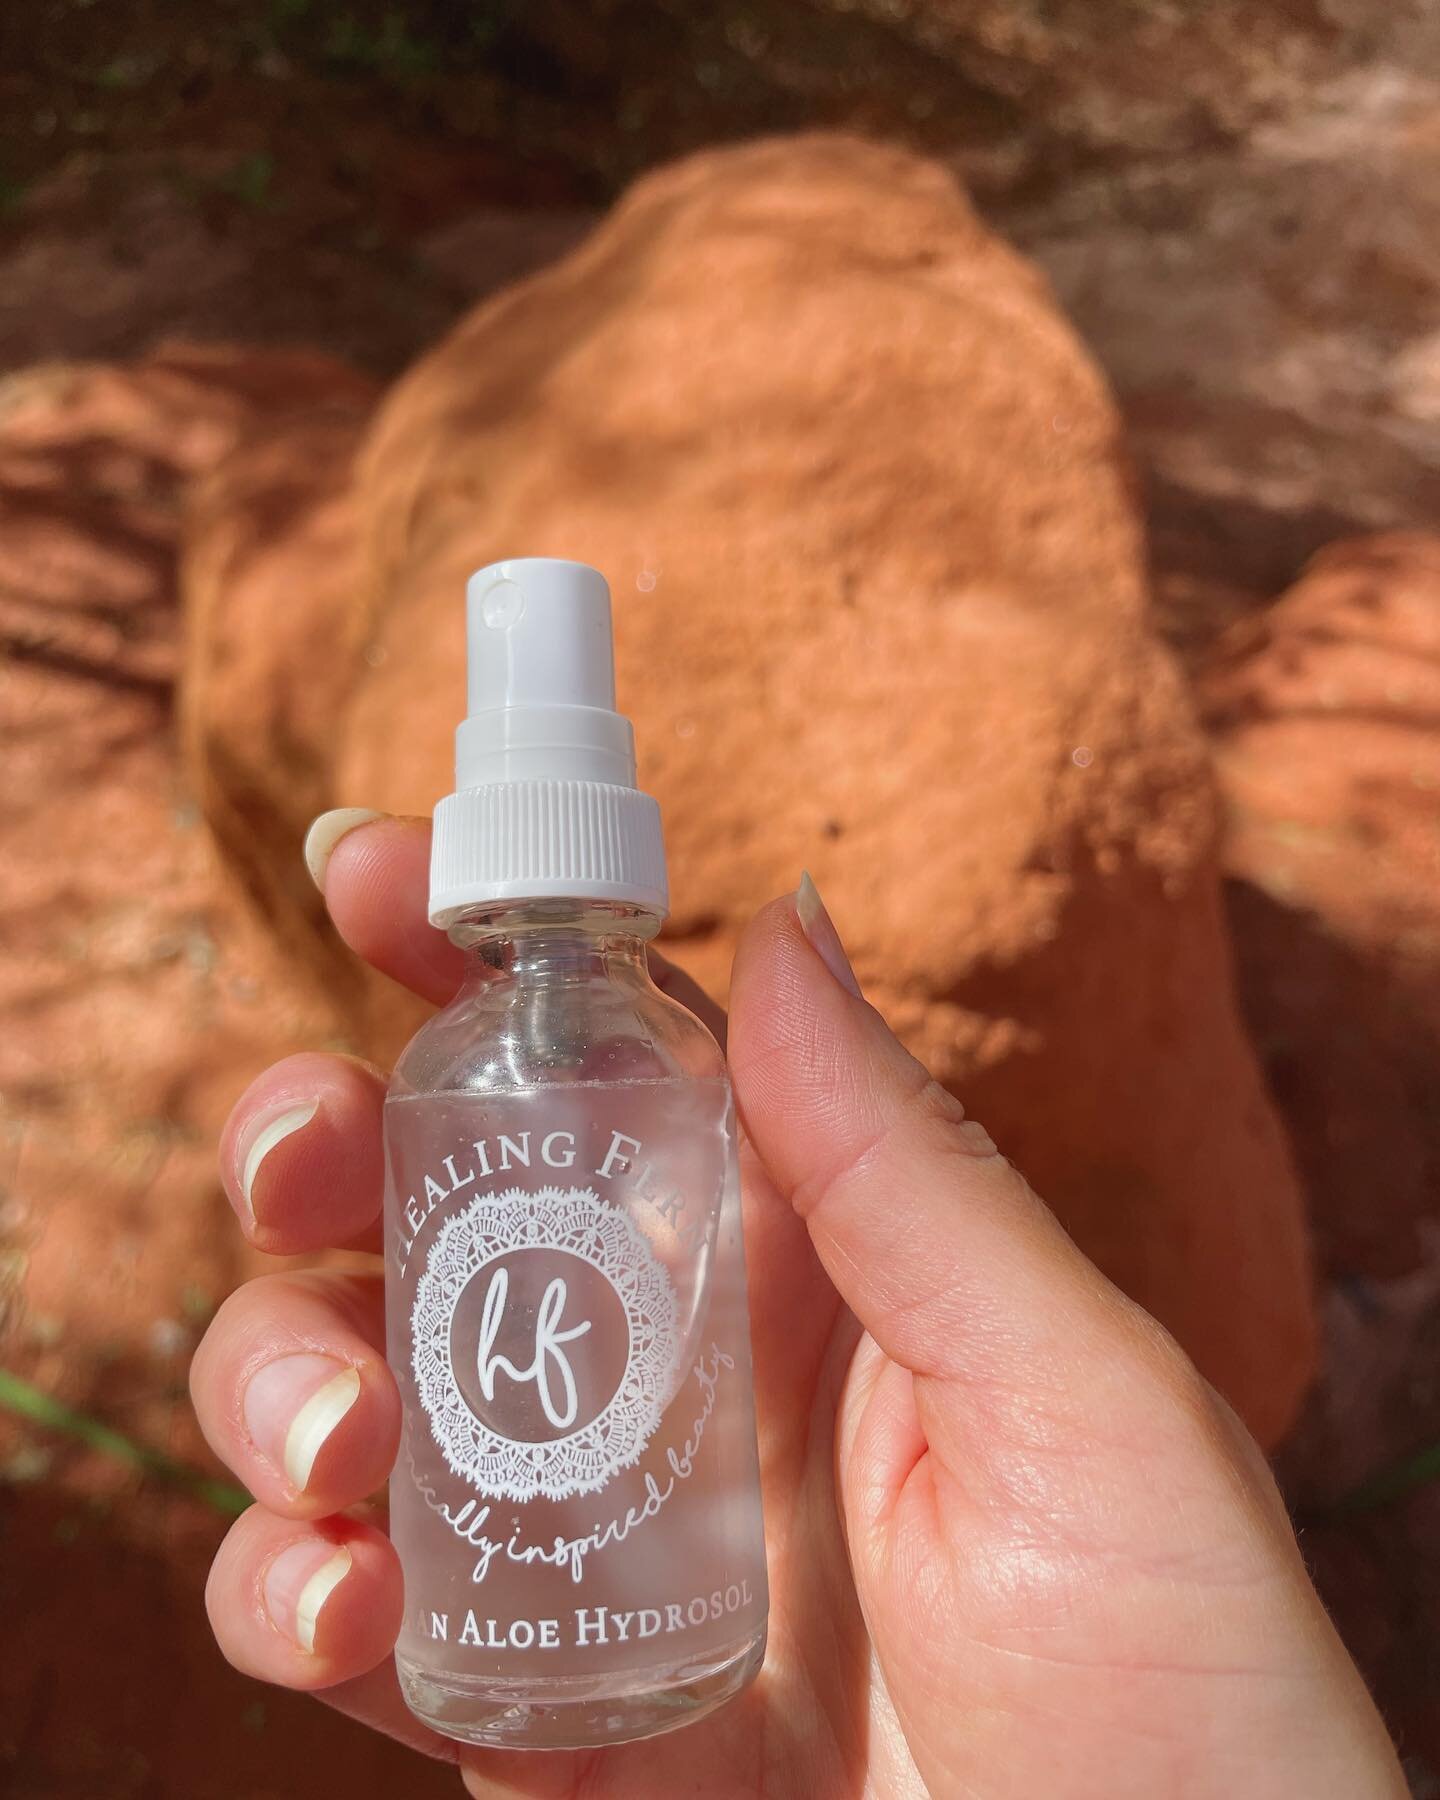 🏜️Healing Fern hydrosols ⚗️💦 perfect for a cooling and uplifting spritz during a long day of hiking! This is the 1oz size, travels light and works wonders for weekend getaways😉🌿☀️